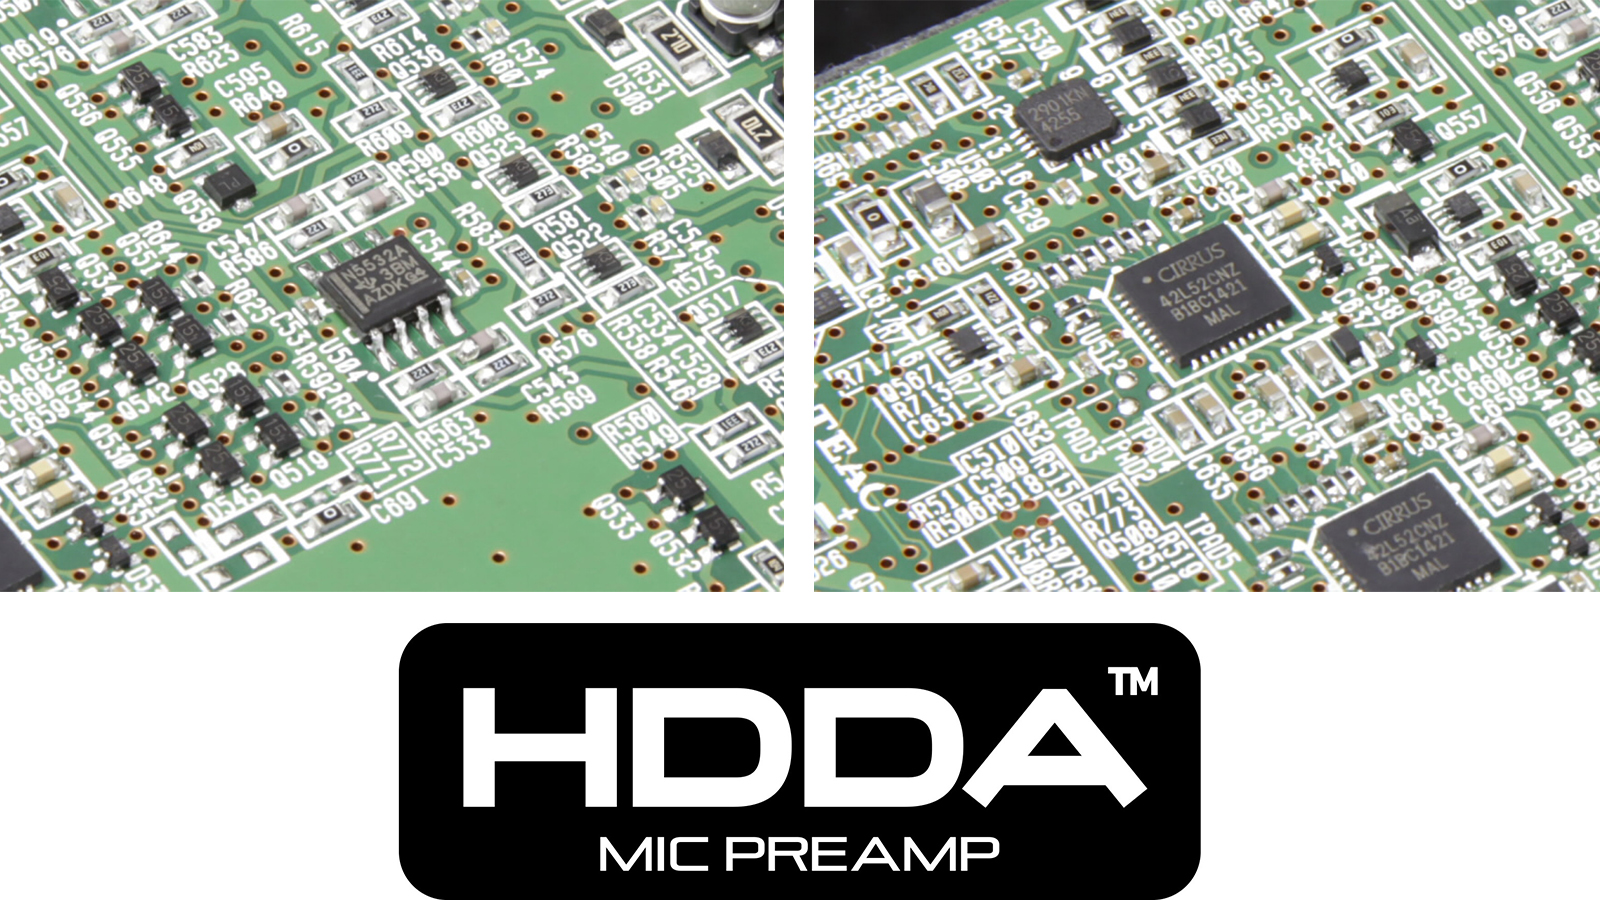 High-quality HDDA (High Definition Discrete Architecture) mic preamps